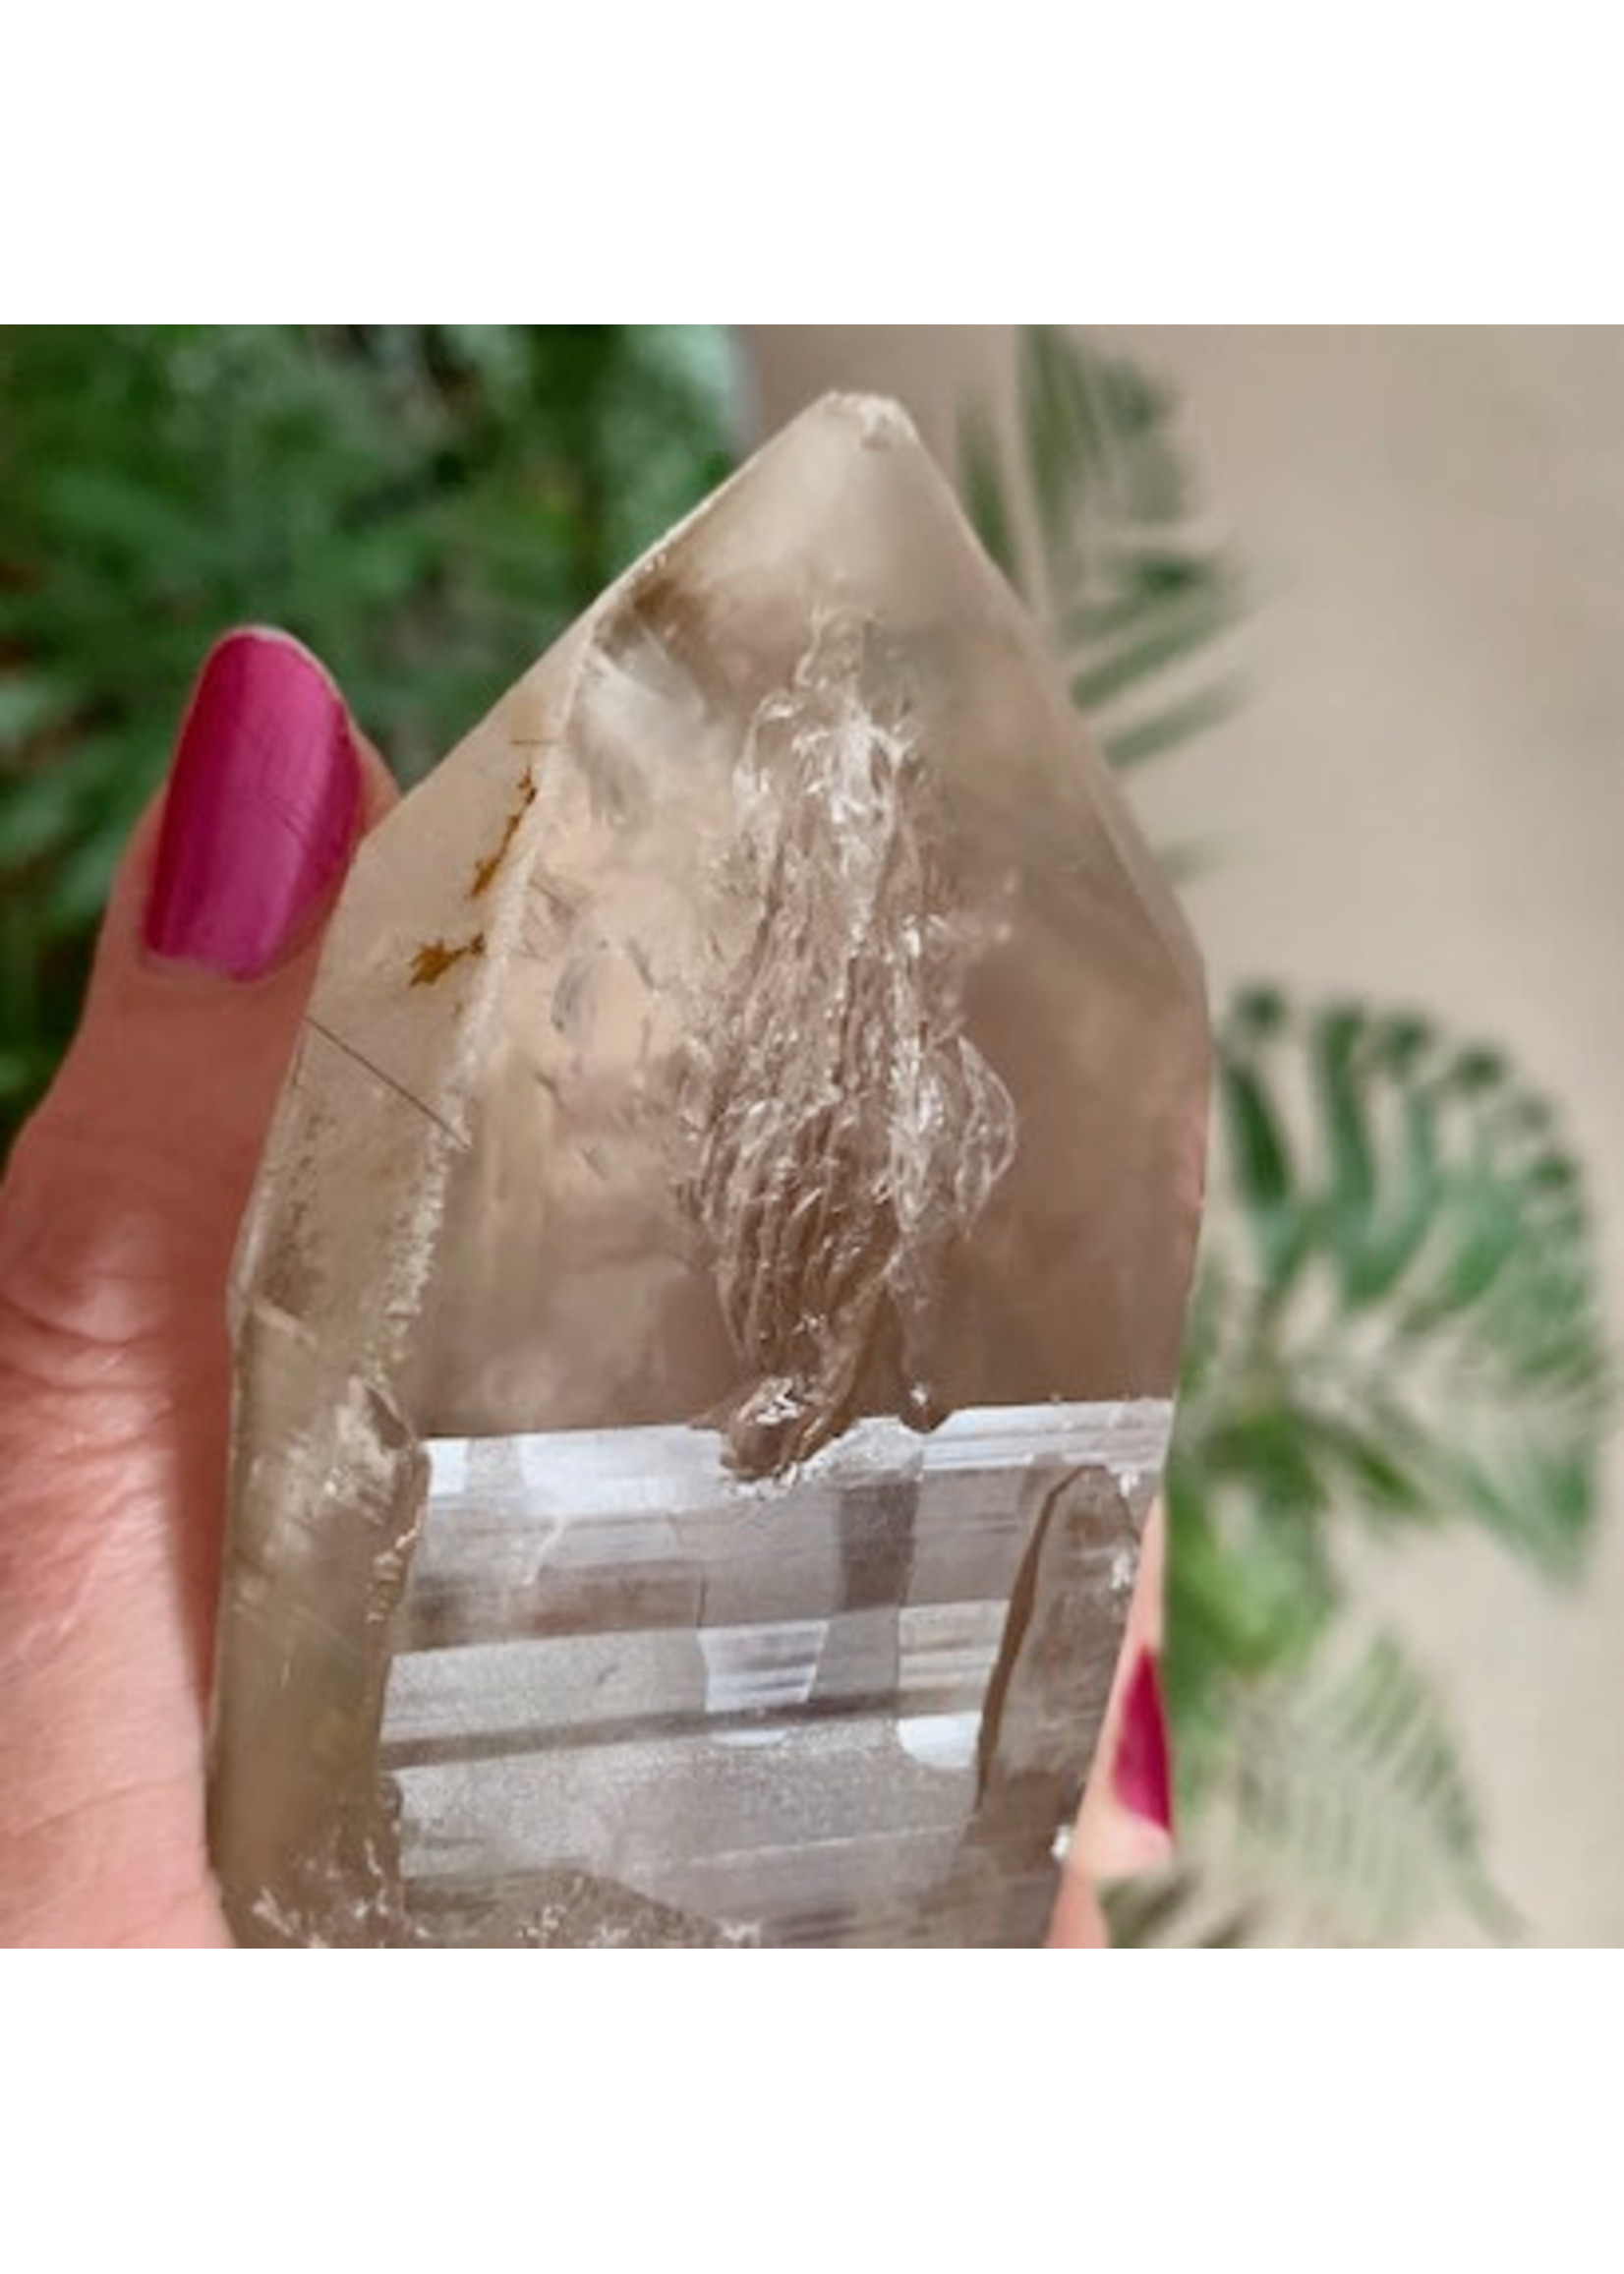 Smoky Quartz Lightning Struck Points with Rutile for protection through change